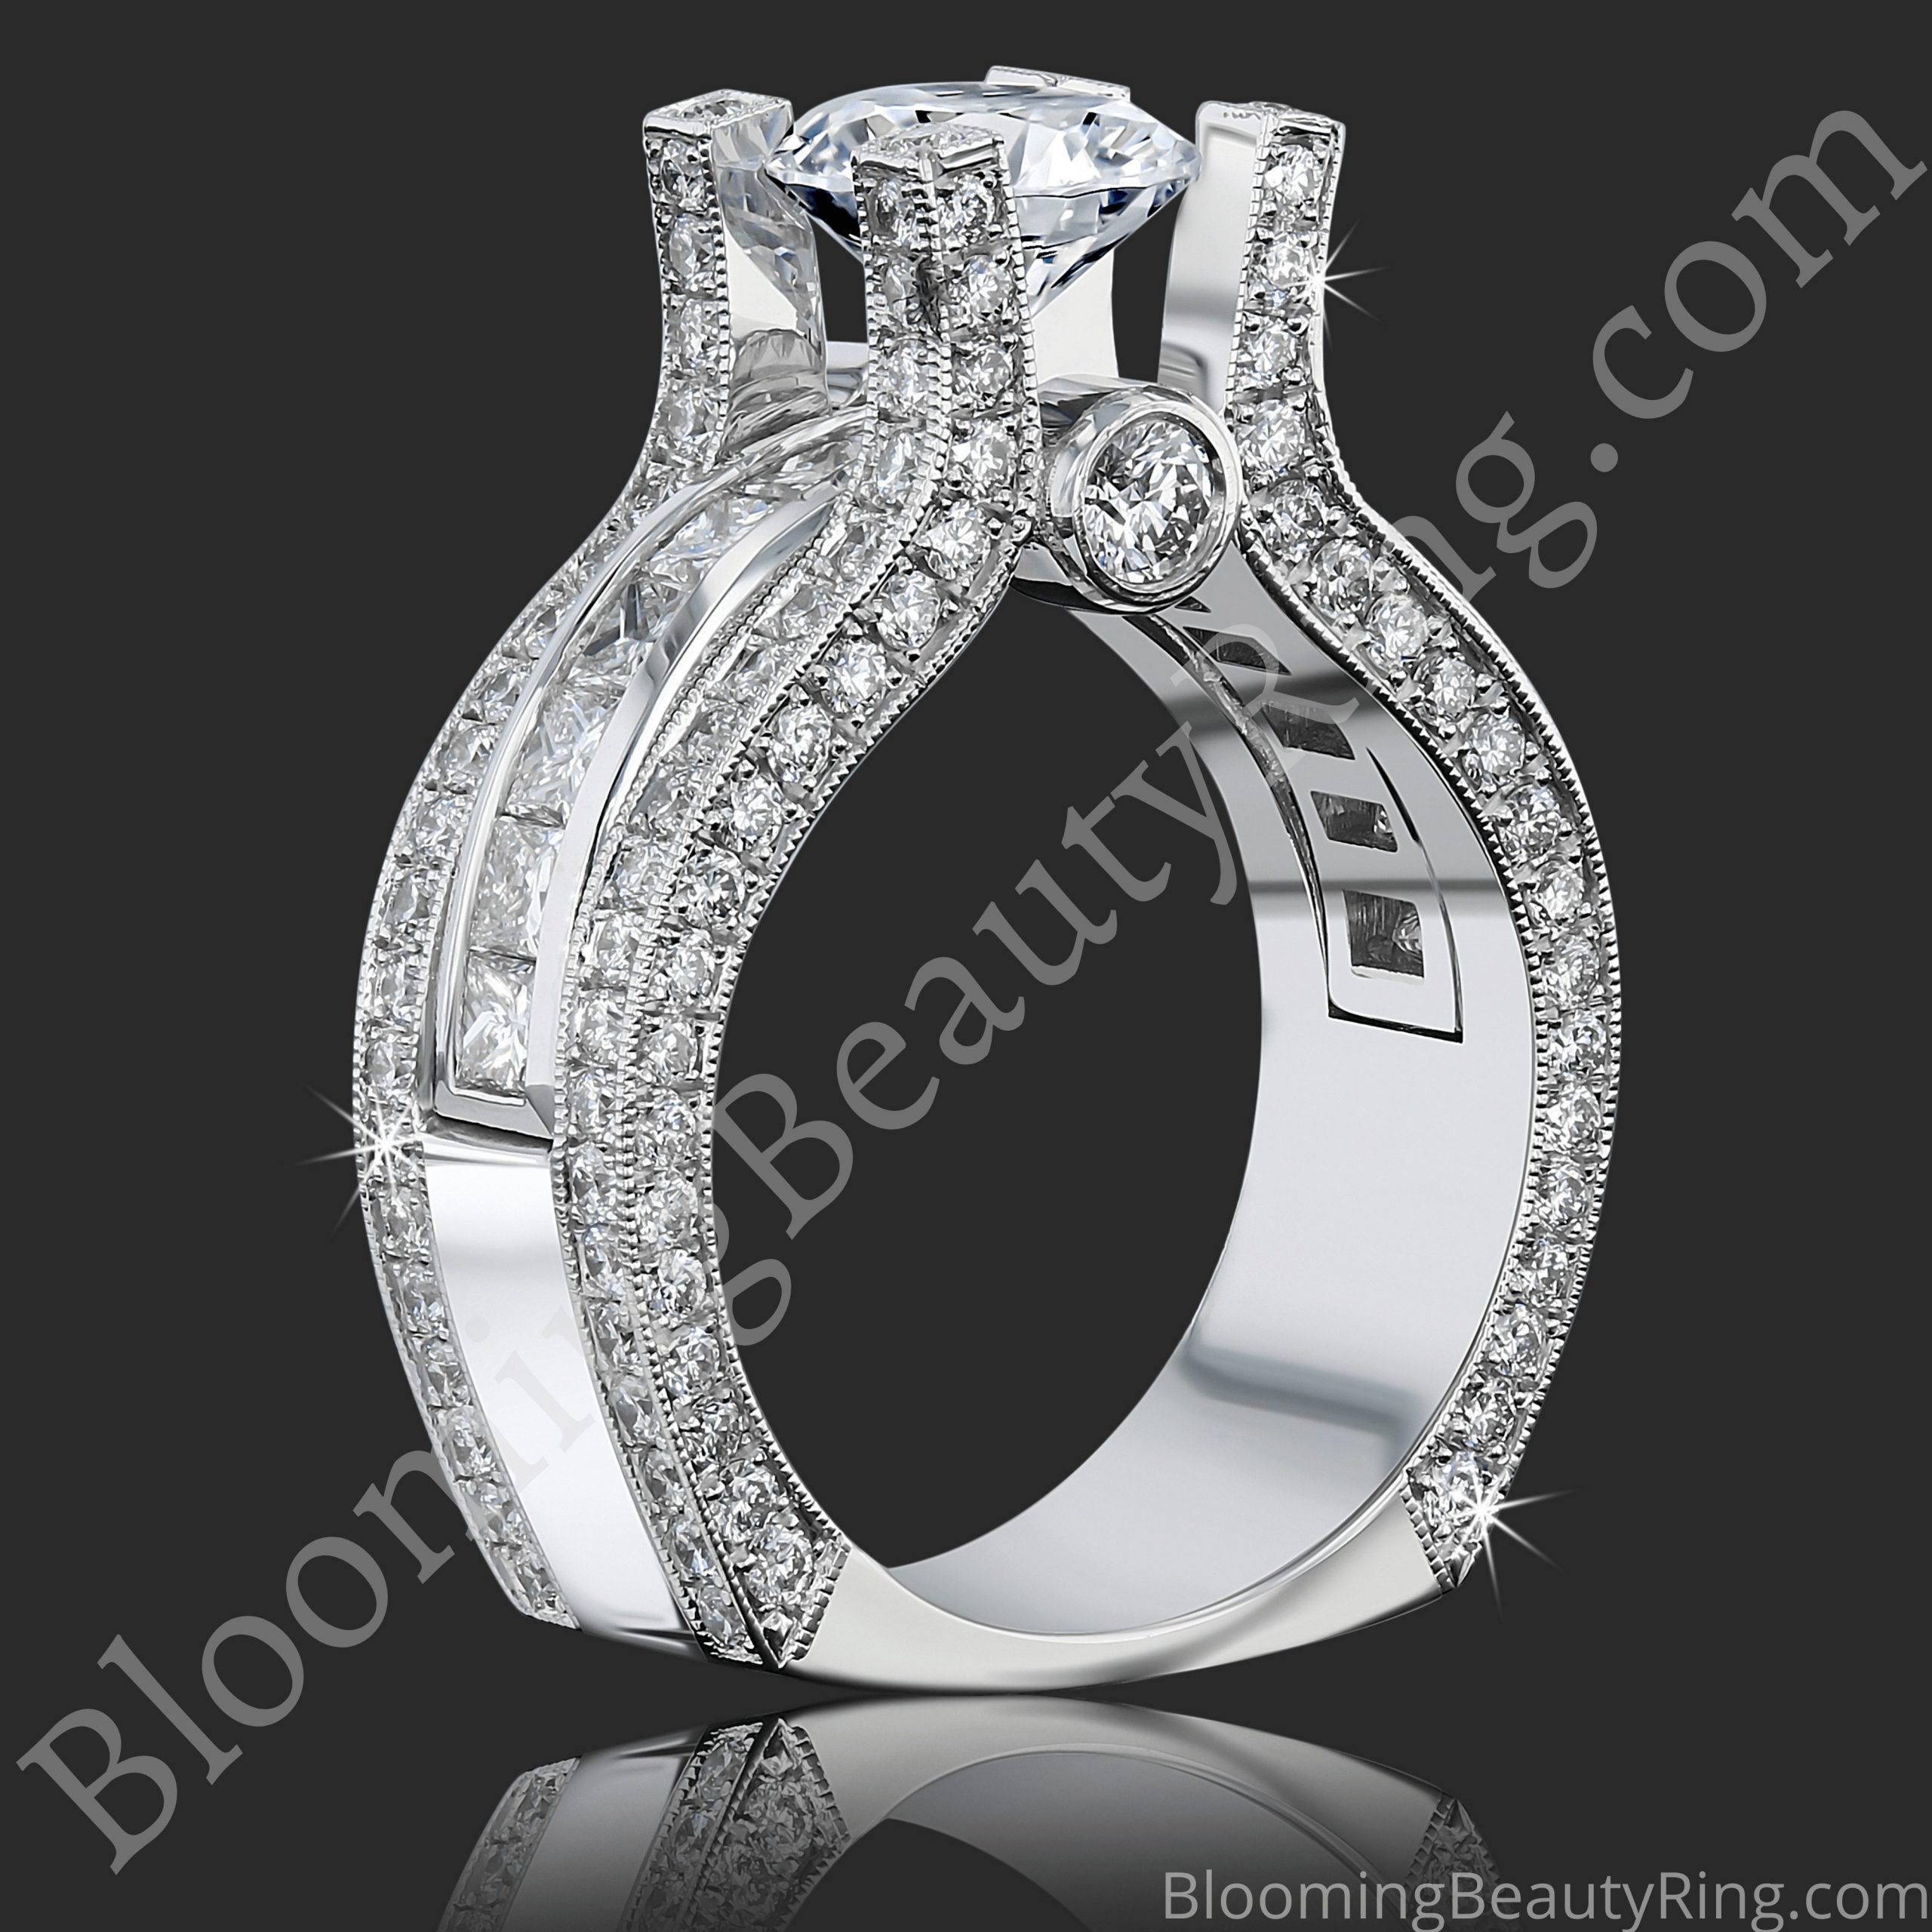 New Design Wide Band Diamond Engagement Ring With Tension Set Diamond – bbr744e standing up